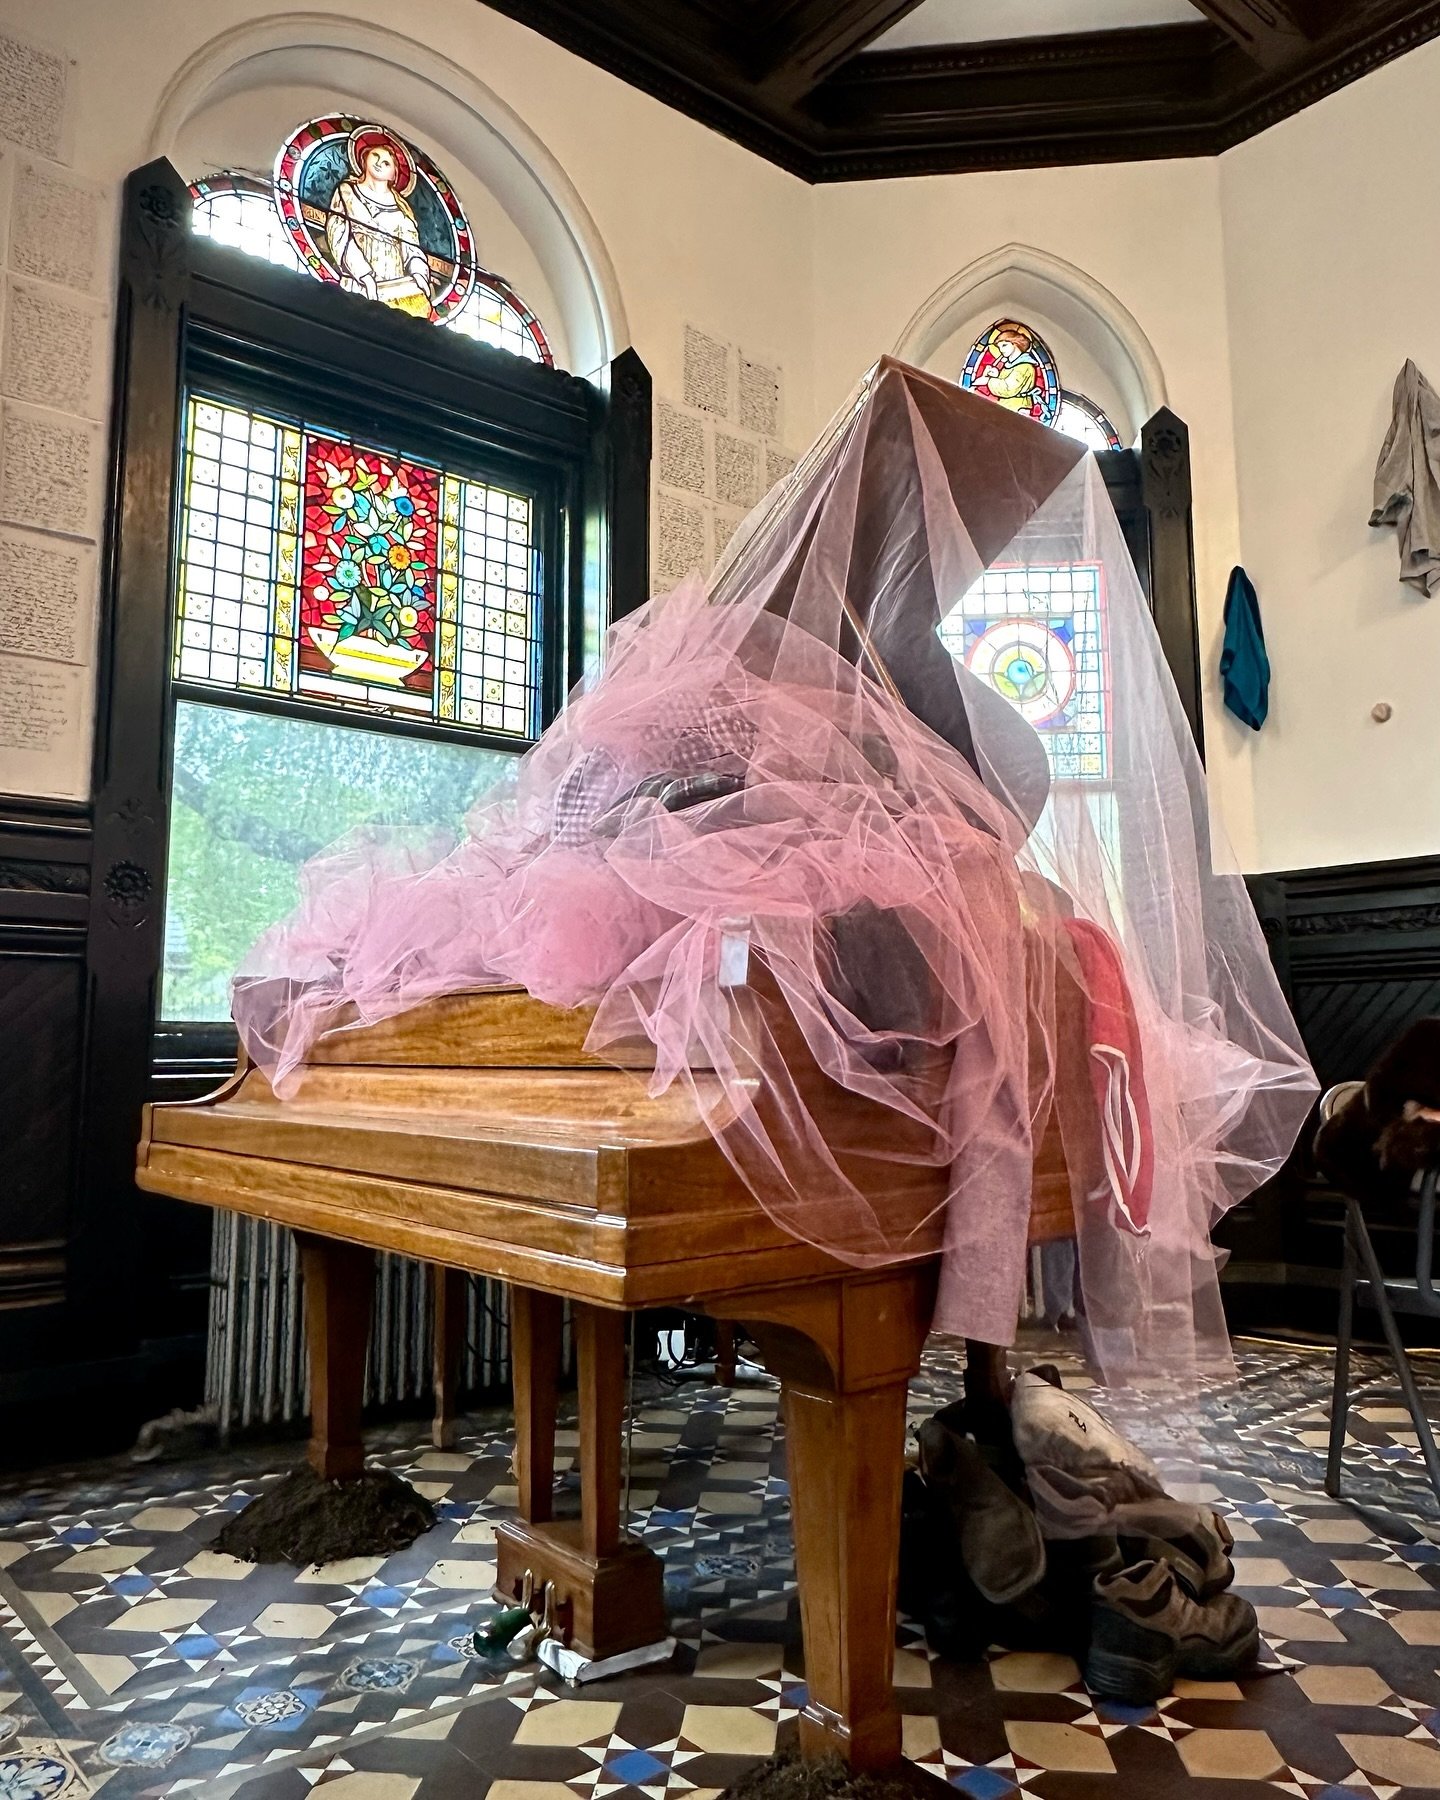 Yesterday I stepped inside the Gatehouse at Green-Wood cemetery and met Adam Tendler, the artist in residence. The room was soaked with light and in the center of it was a piano draped with old clothes (donated by people who have lost someone they lo